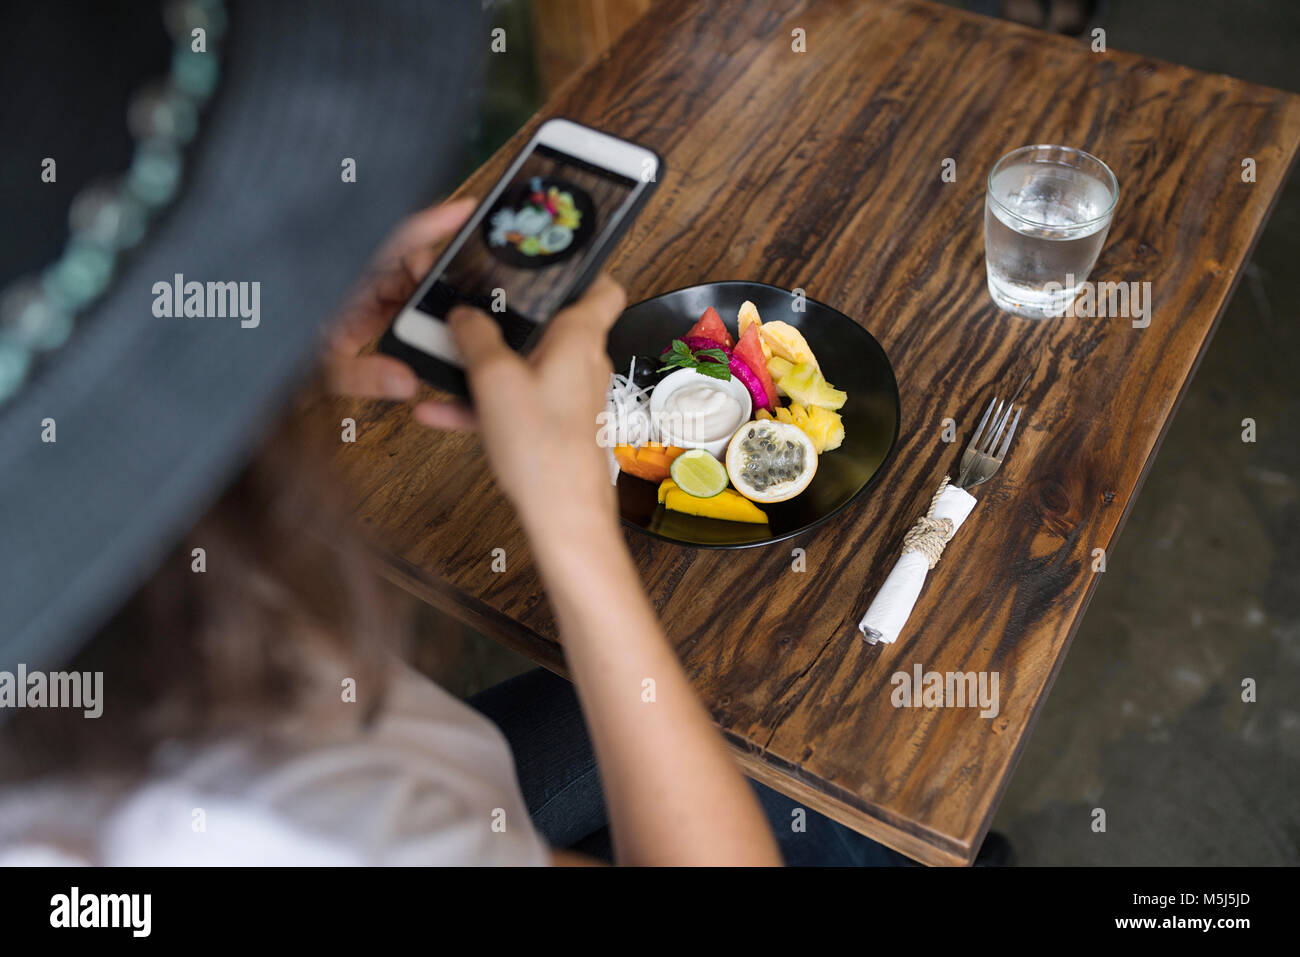 Woman taking a picture of food on a plate with smartphone Stock Photo